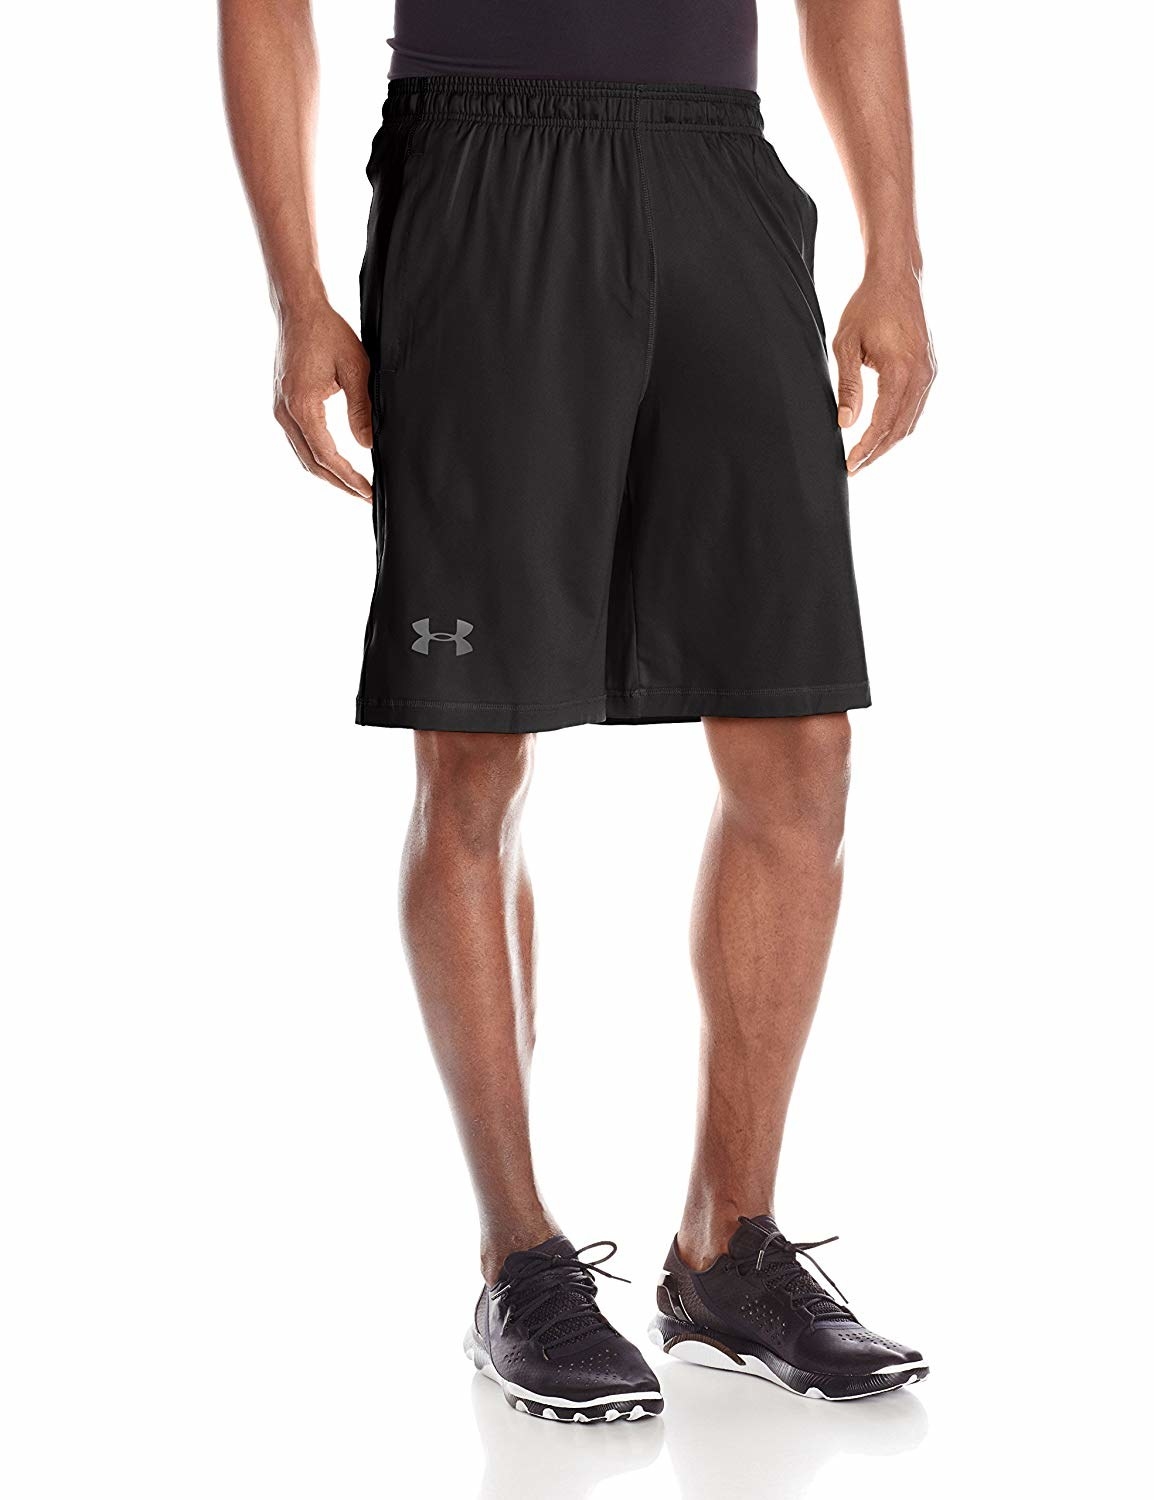 model wearing the knee-length shorts in black with a small Under Armor logo on the bottom right knee